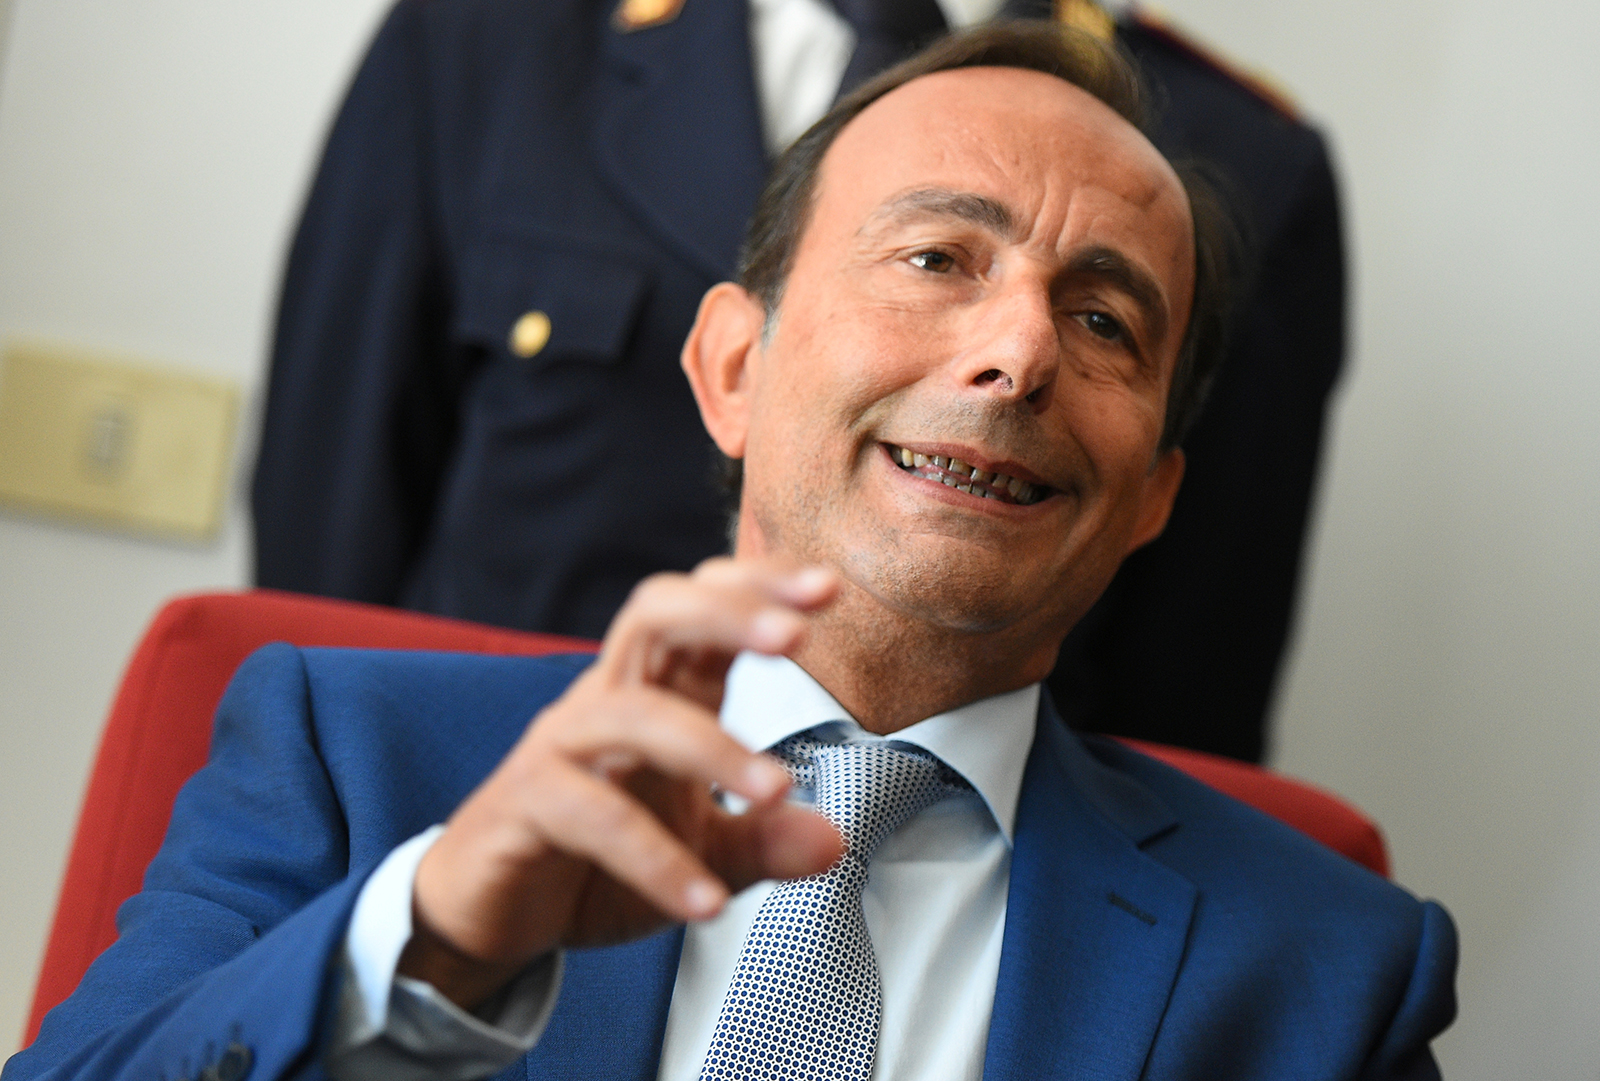 Prosecutor Salvatore De Luca talks during a news conference in Palermo, Sicily on July 17, 2019.